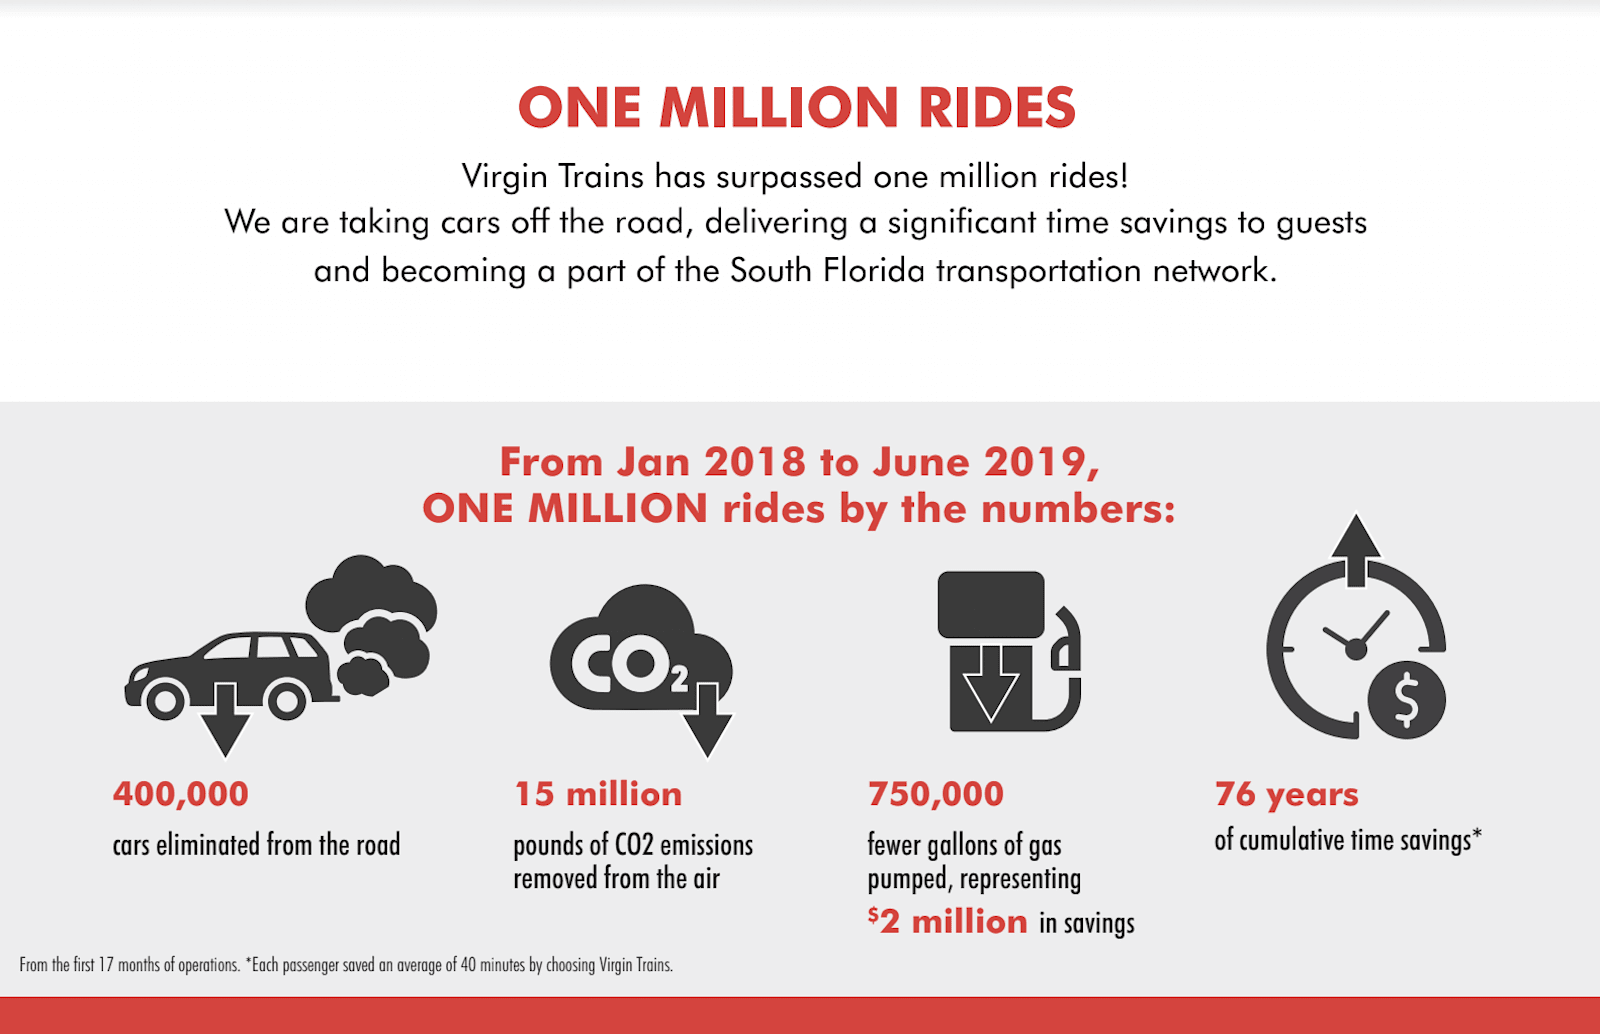 An infographic about Virgin Trains USA. The main message is 'Virgin Trains has surpassed one million rides! We are taking cars off the road, delivering a significant time savings to guests and becoming a part of the South Florida transportation network'